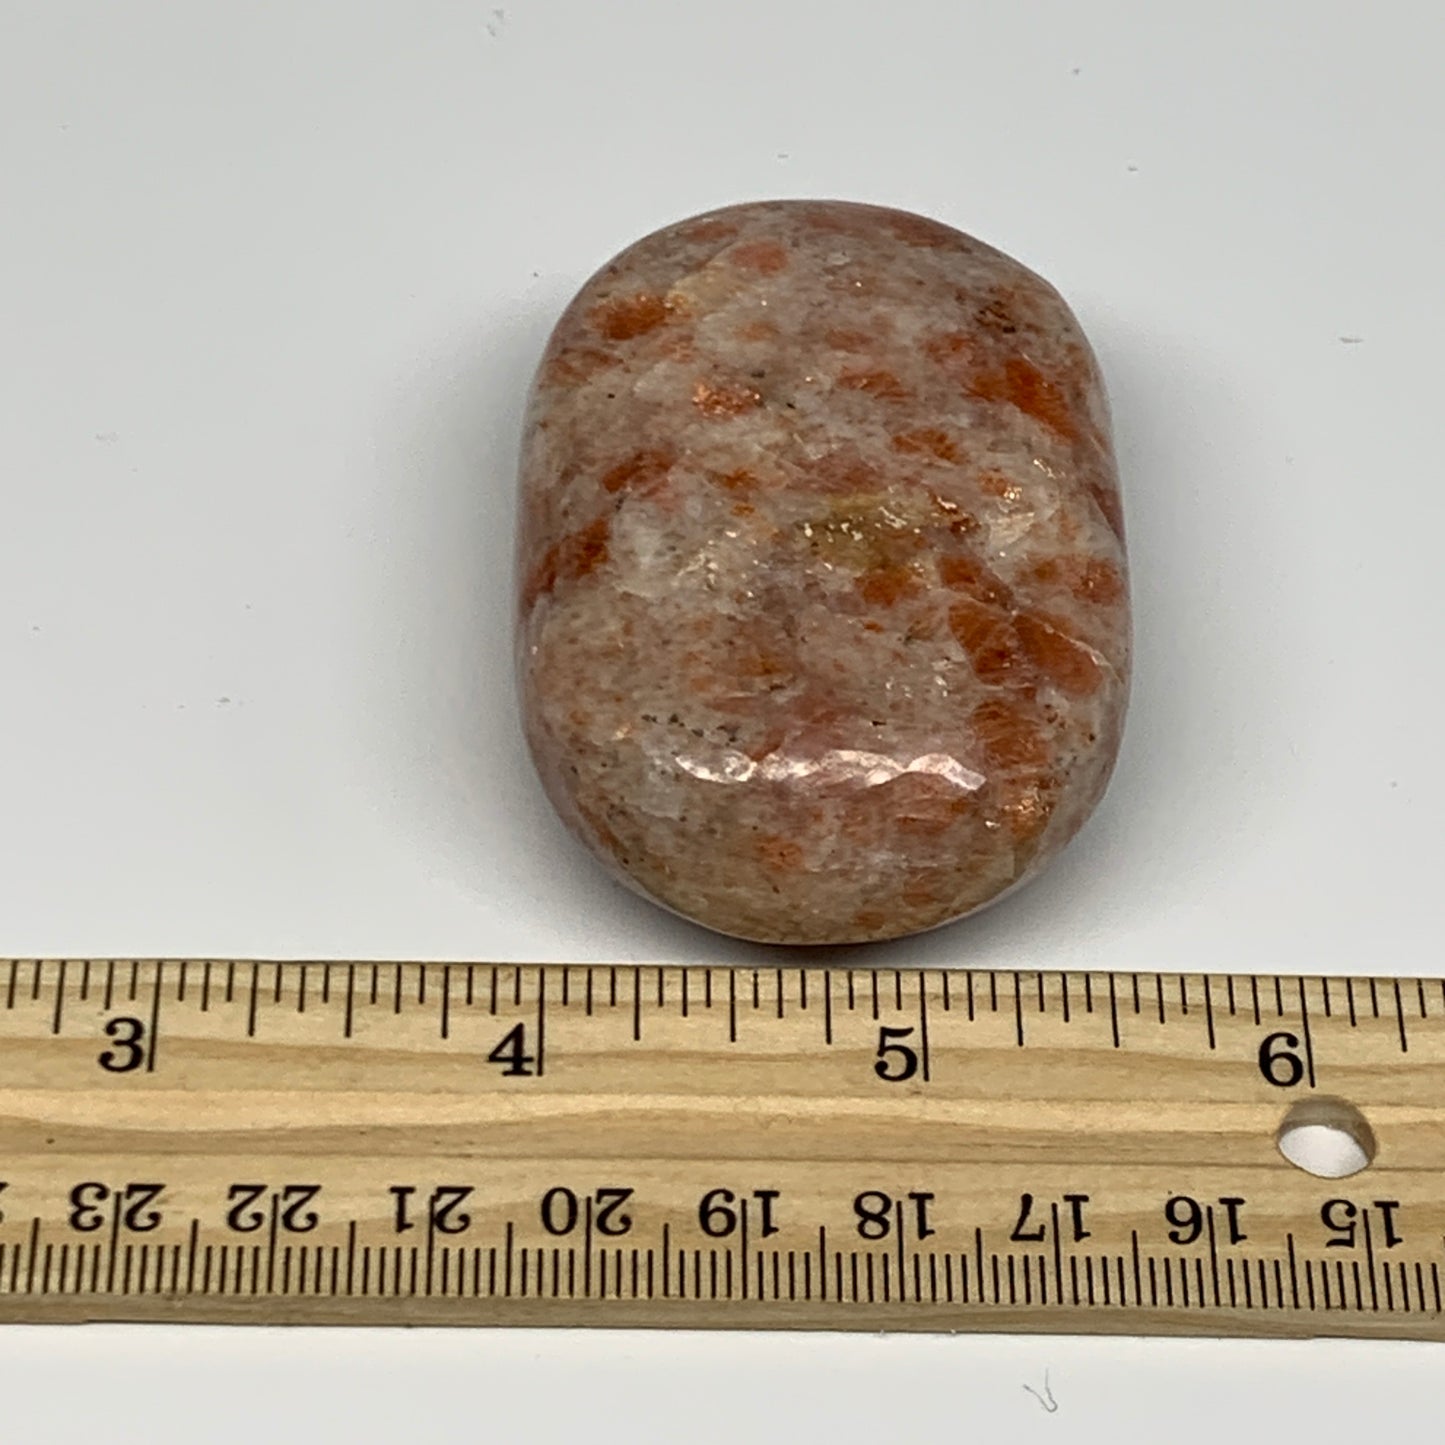 108.4g, 2.4"x1.7"x1", Natural Sunstone Palm-Stone Polished from India, B27063